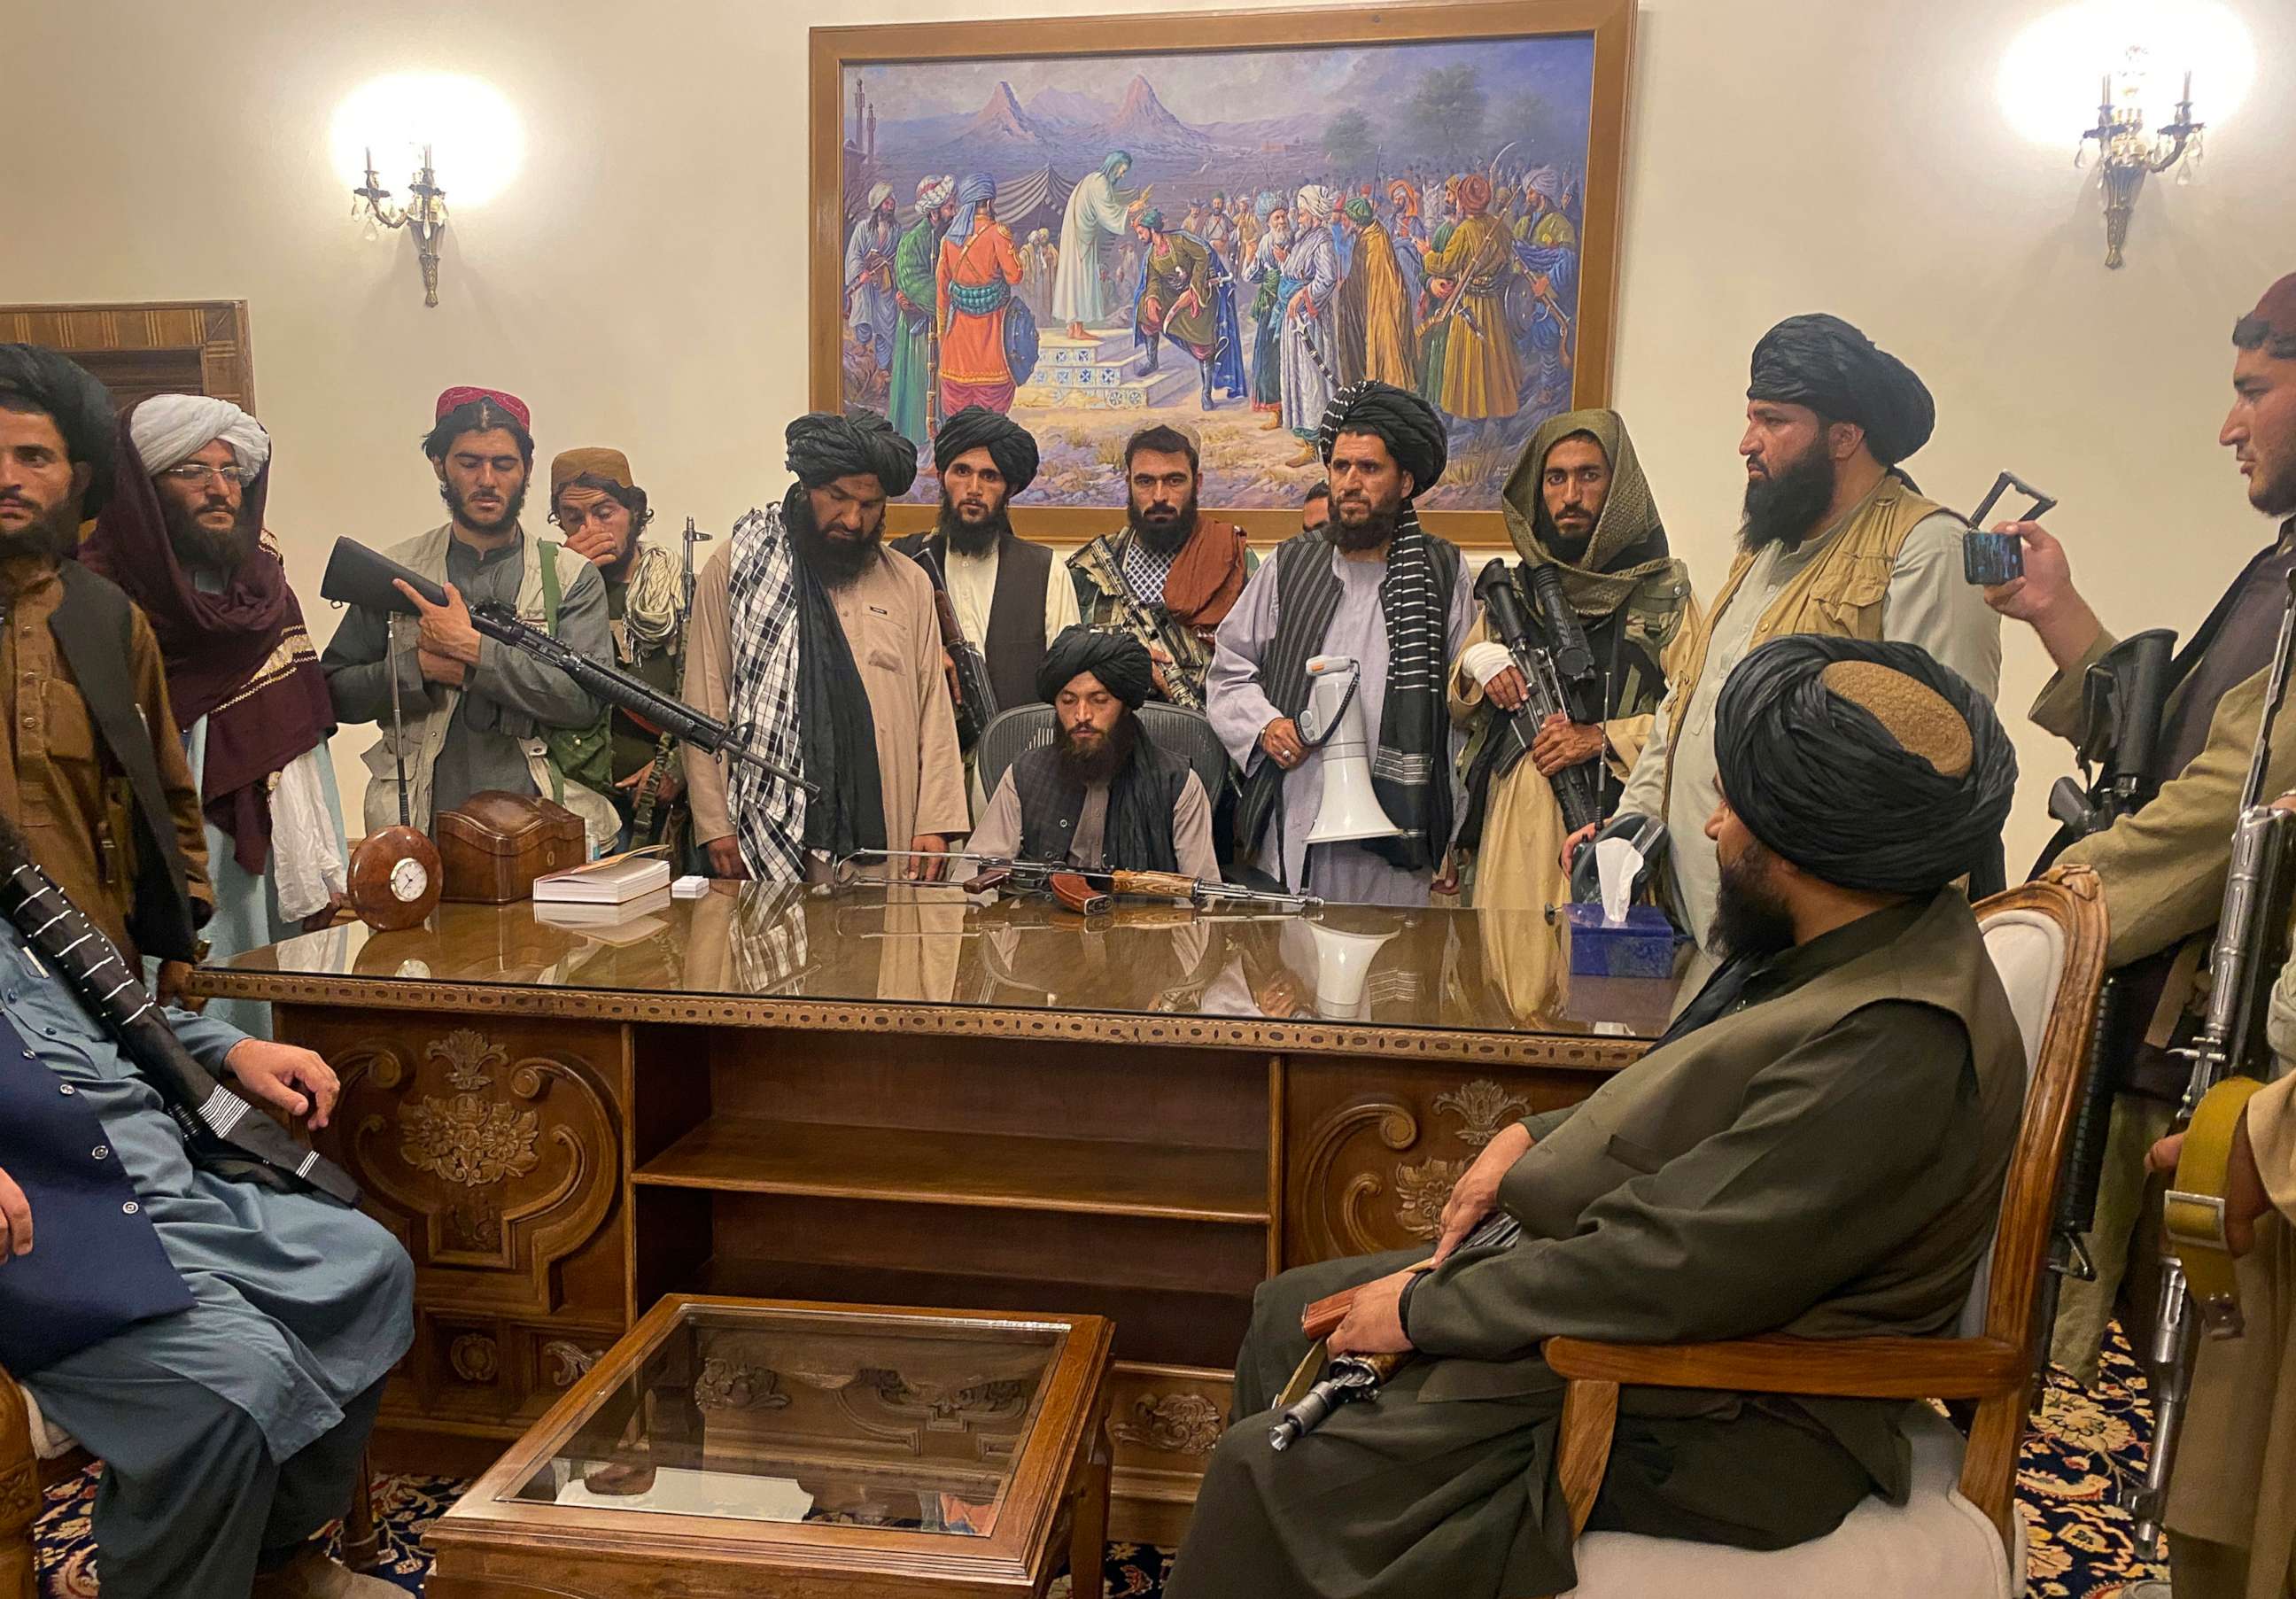 PHOTO: Taliban fighters take control of Afghan presidential palace after President Ashraf Ghani fled the country, in Kabul, Aug. 15, 2021. An attendee holds a phone, recording the events.